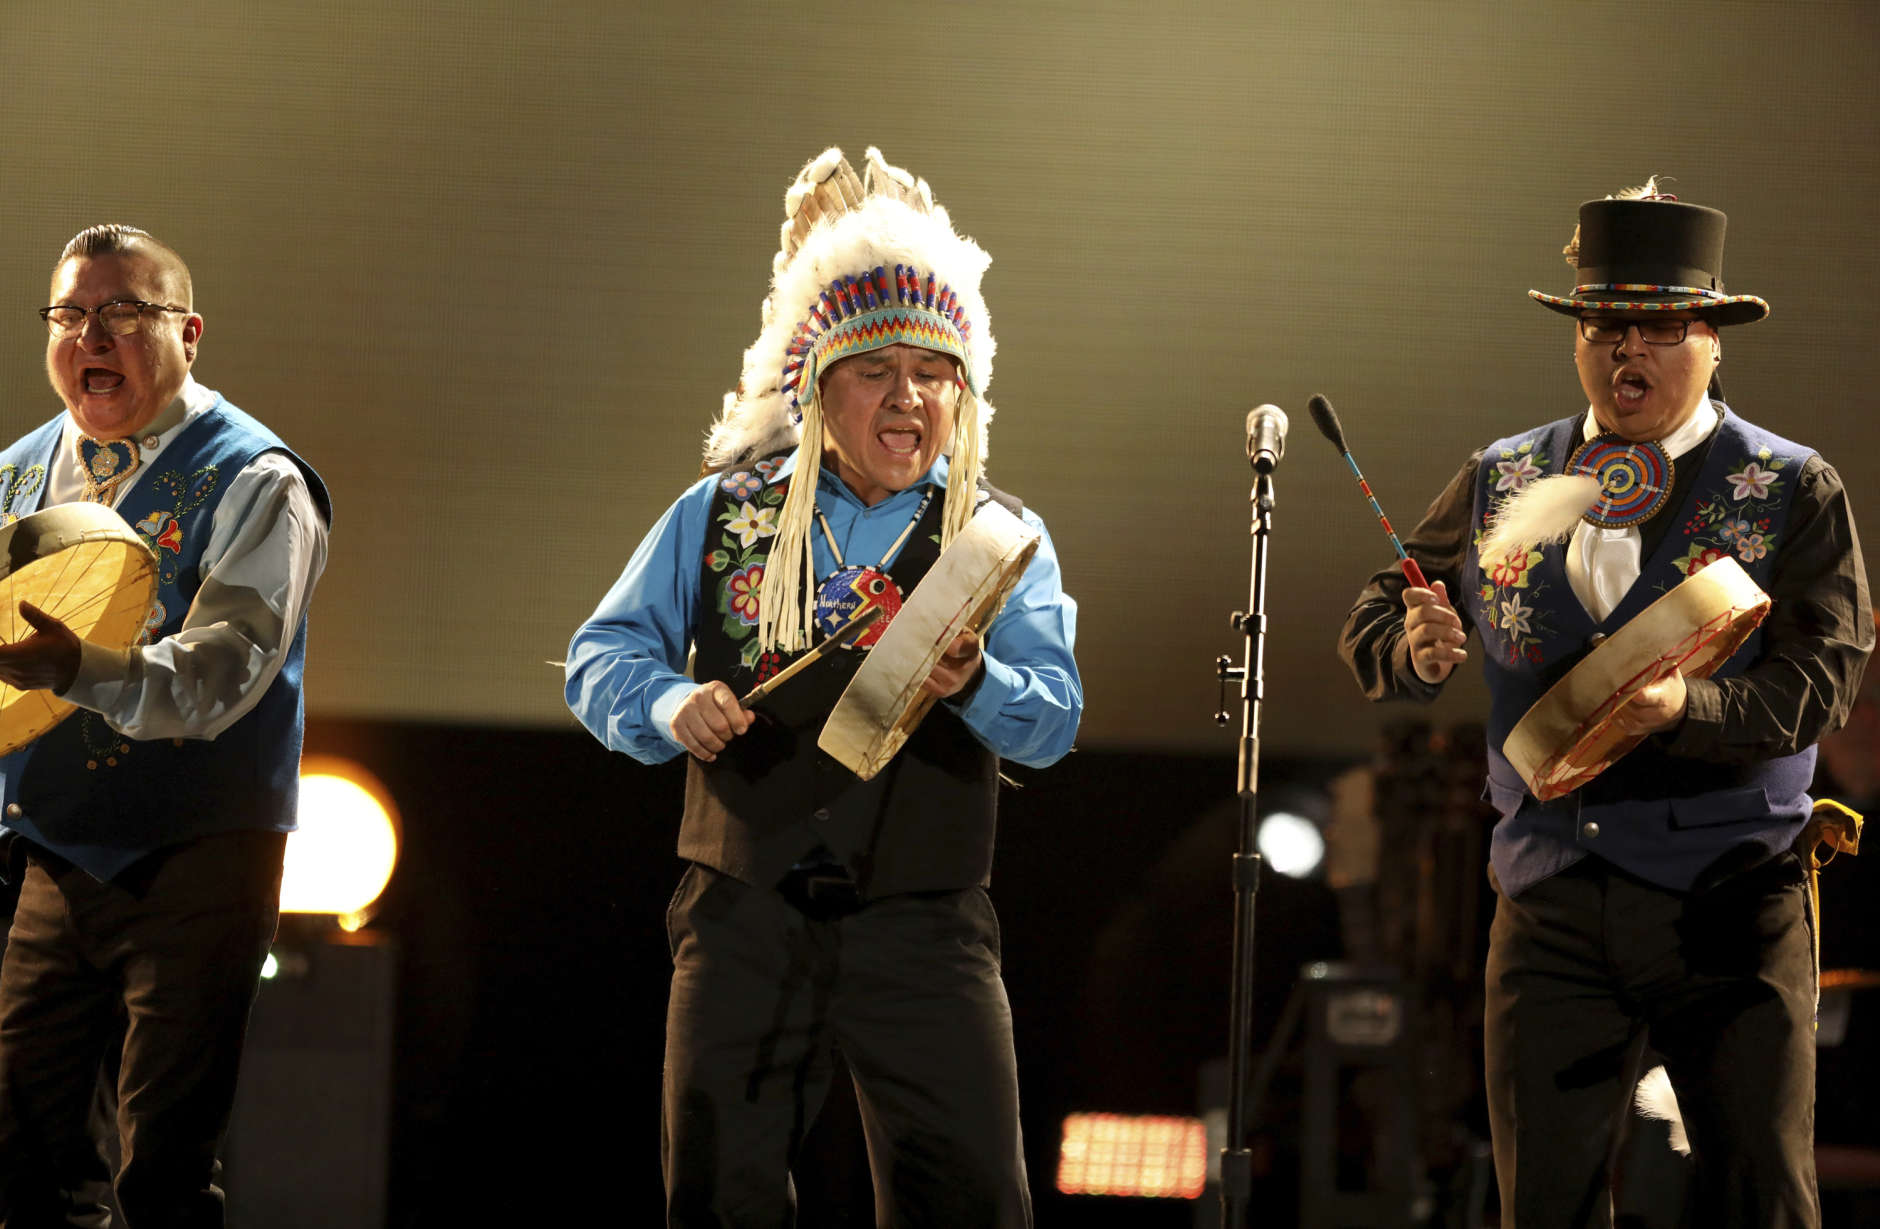 Northern Cree performs at the 59th annual Grammy Awards on Sunday, Feb. 12, 2017, in Los Angeles. (Photo by Matt Sayles/Invision/AP)